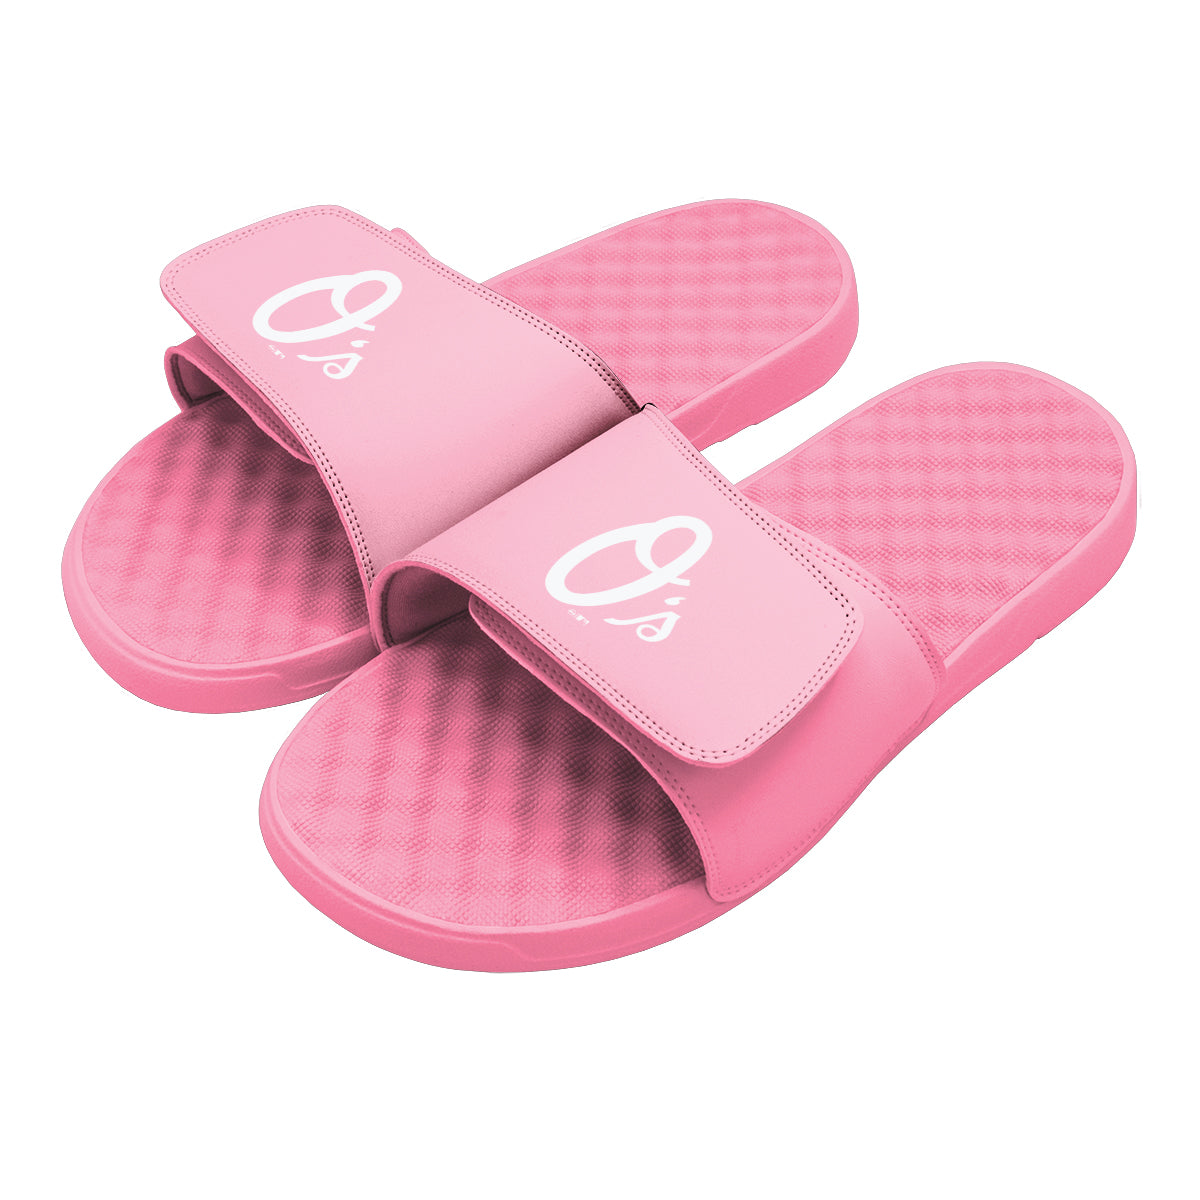 Baltimore Orioles Primary Pink Slides